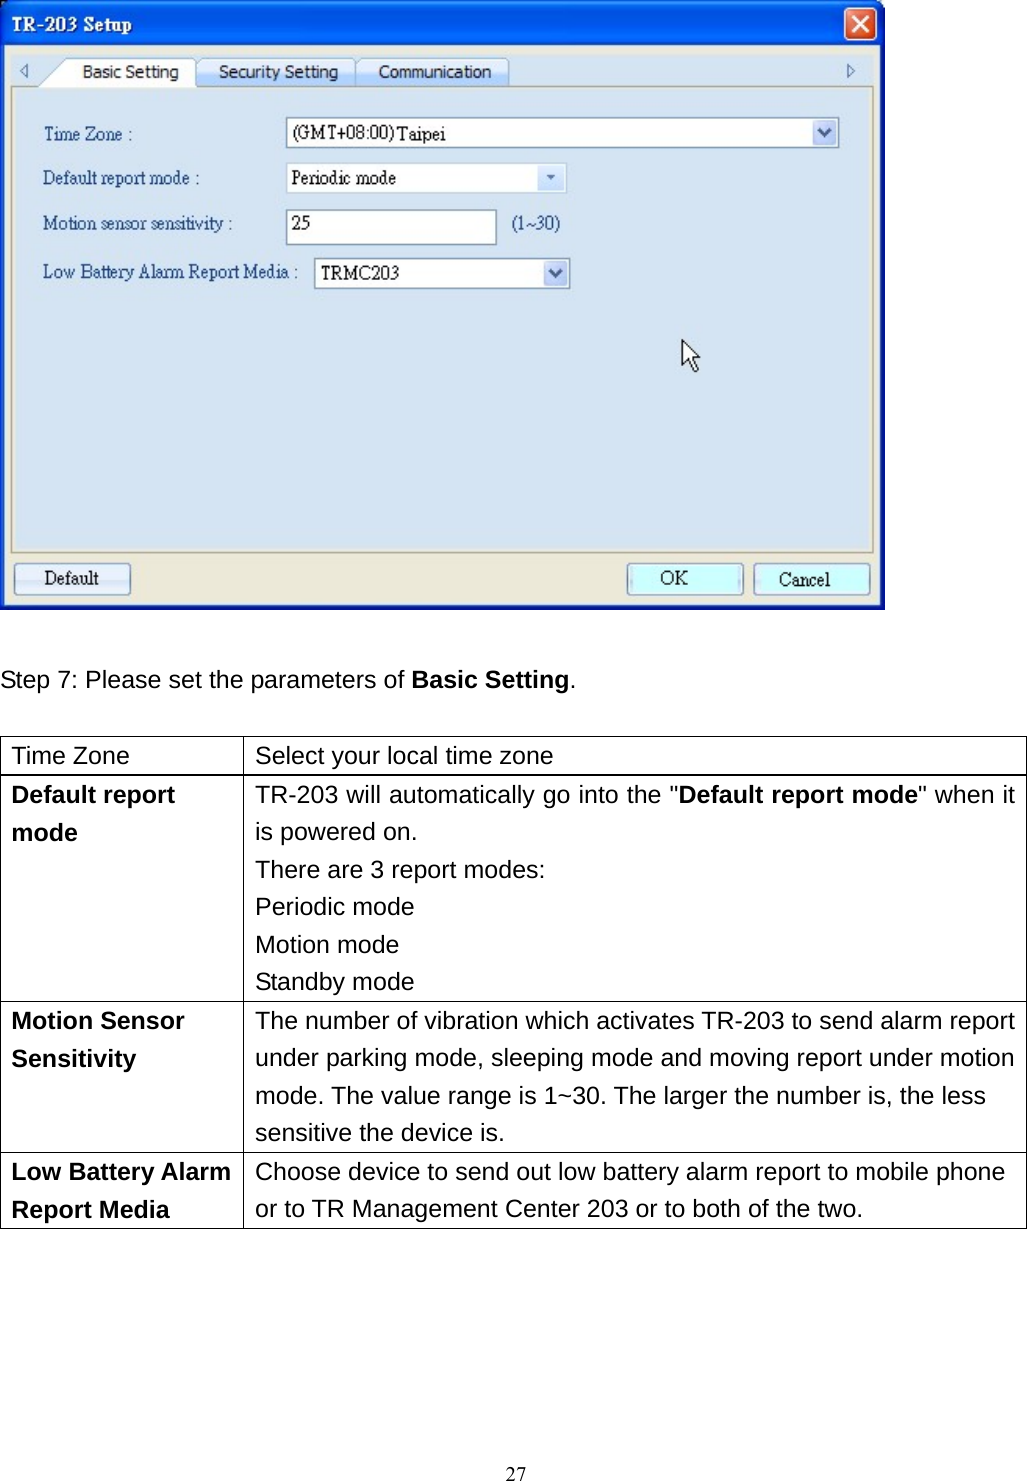   Step 7: Please set the parameters of Basic Setting.  Time Zone  Select your local time zone Default report mode TR-203 will automatically go into the &quot;Default report mode&quot; when it is powered on. There are 3 report modes: Periodic mode Motion mode Standby mode Motion Sensor Sensitivity The number of vibration which activates TR-203 to send alarm report under parking mode, sleeping mode and moving report under motion mode. The value range is 1~30. The larger the number is, the less sensitive the device is. Low Battery Alarm Report Media Choose device to send out low battery alarm report to mobile phone or to TR Management Center 203 or to both of the two.         27